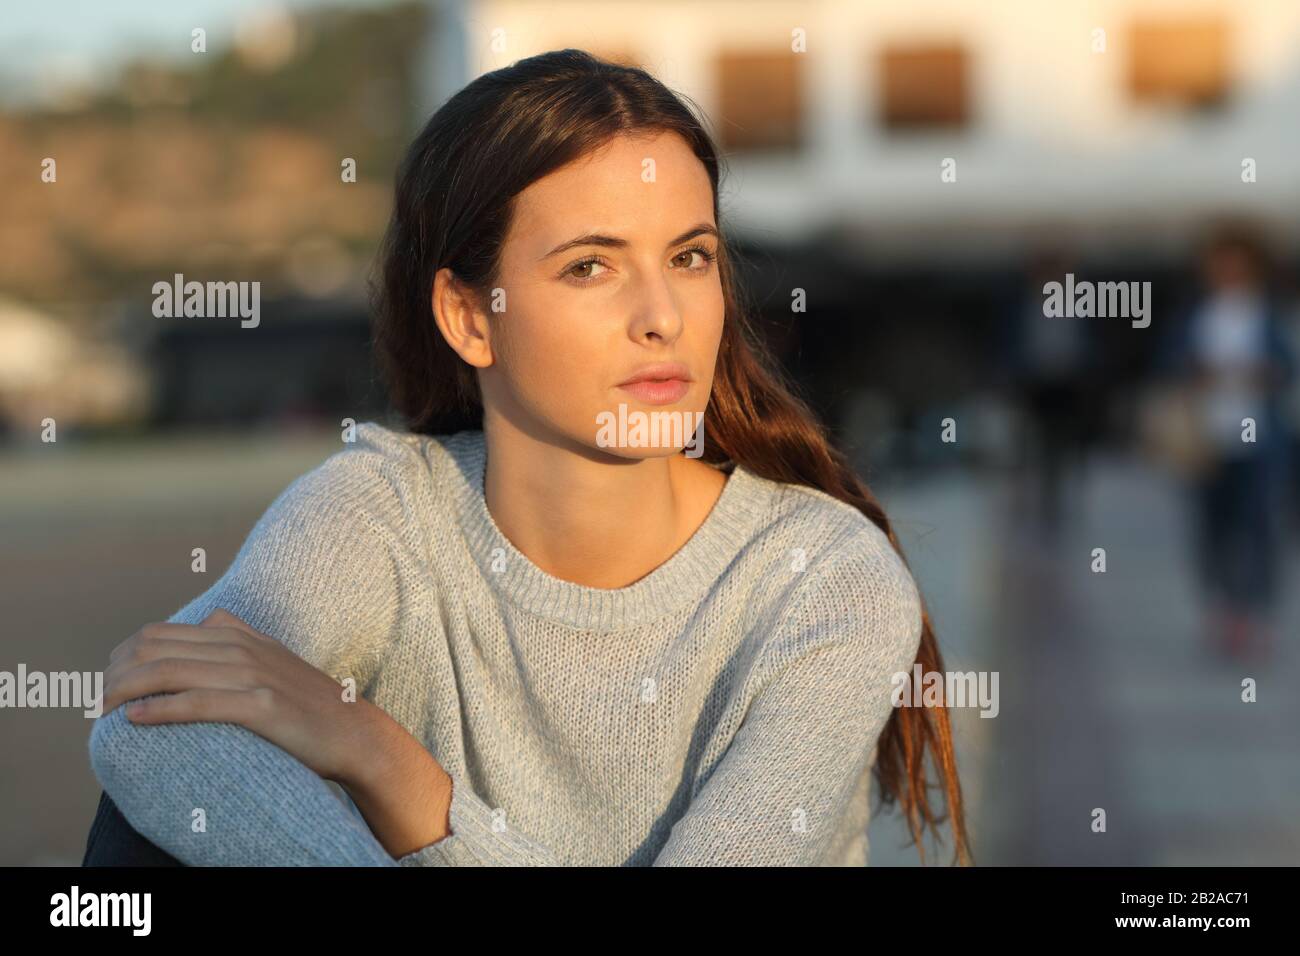 Serious teenage girl looking at camera defiant at sunset sitting in a town Stock Photo